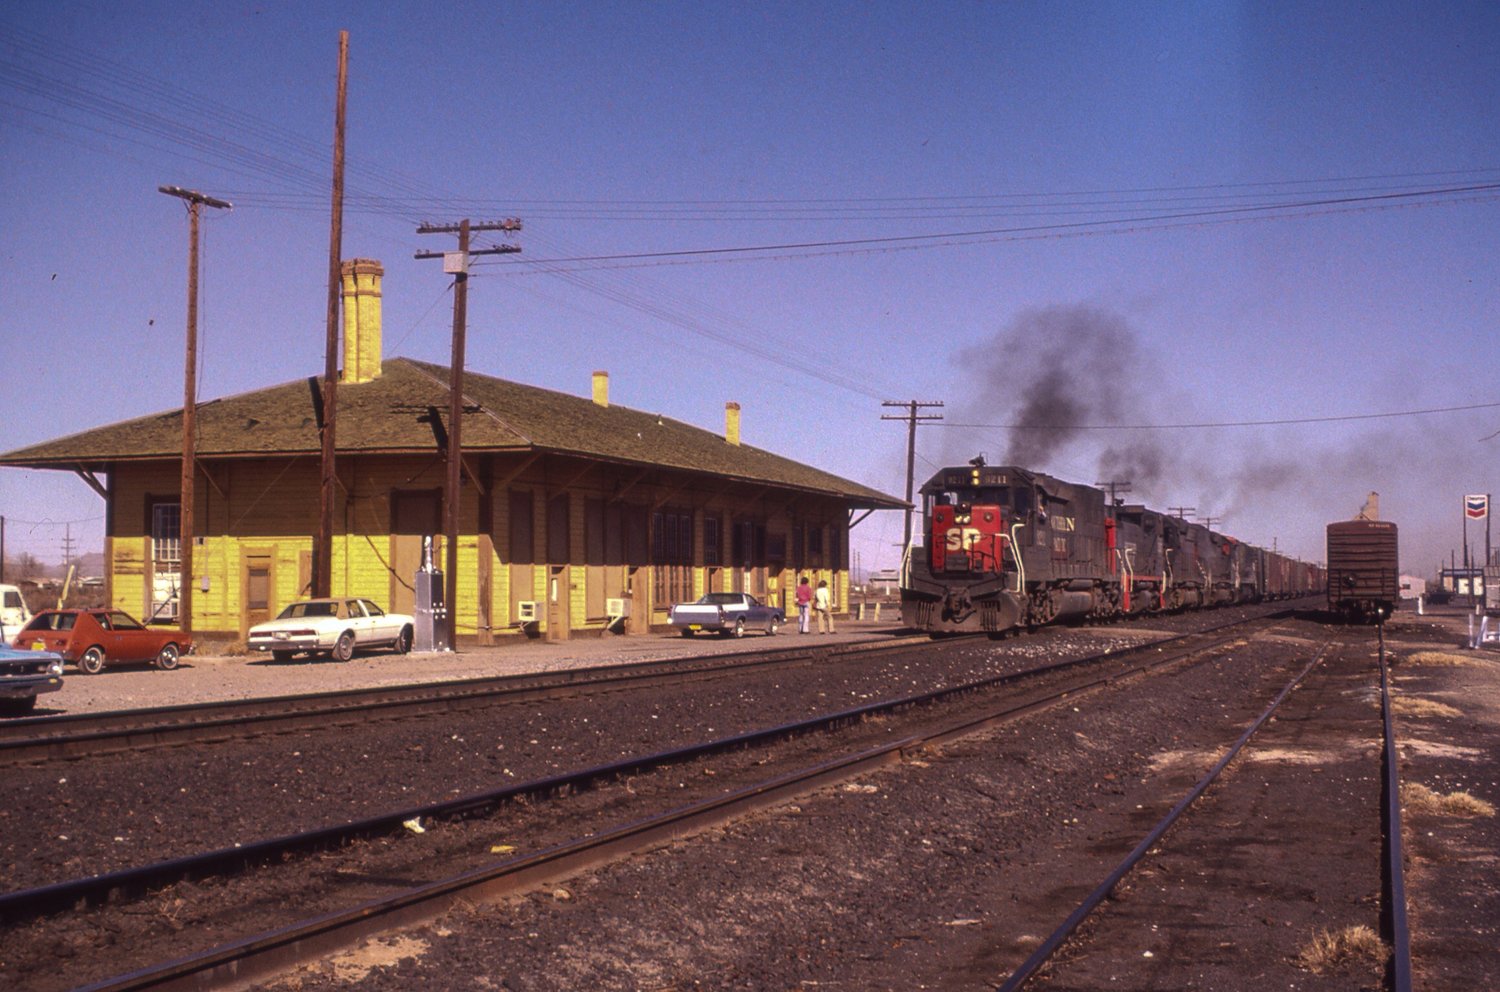 Renovated in 1930, the Deming Train Depot, long part of the landscape of the town was removed in the 1980s, leaving a platform and shelter only standing today.